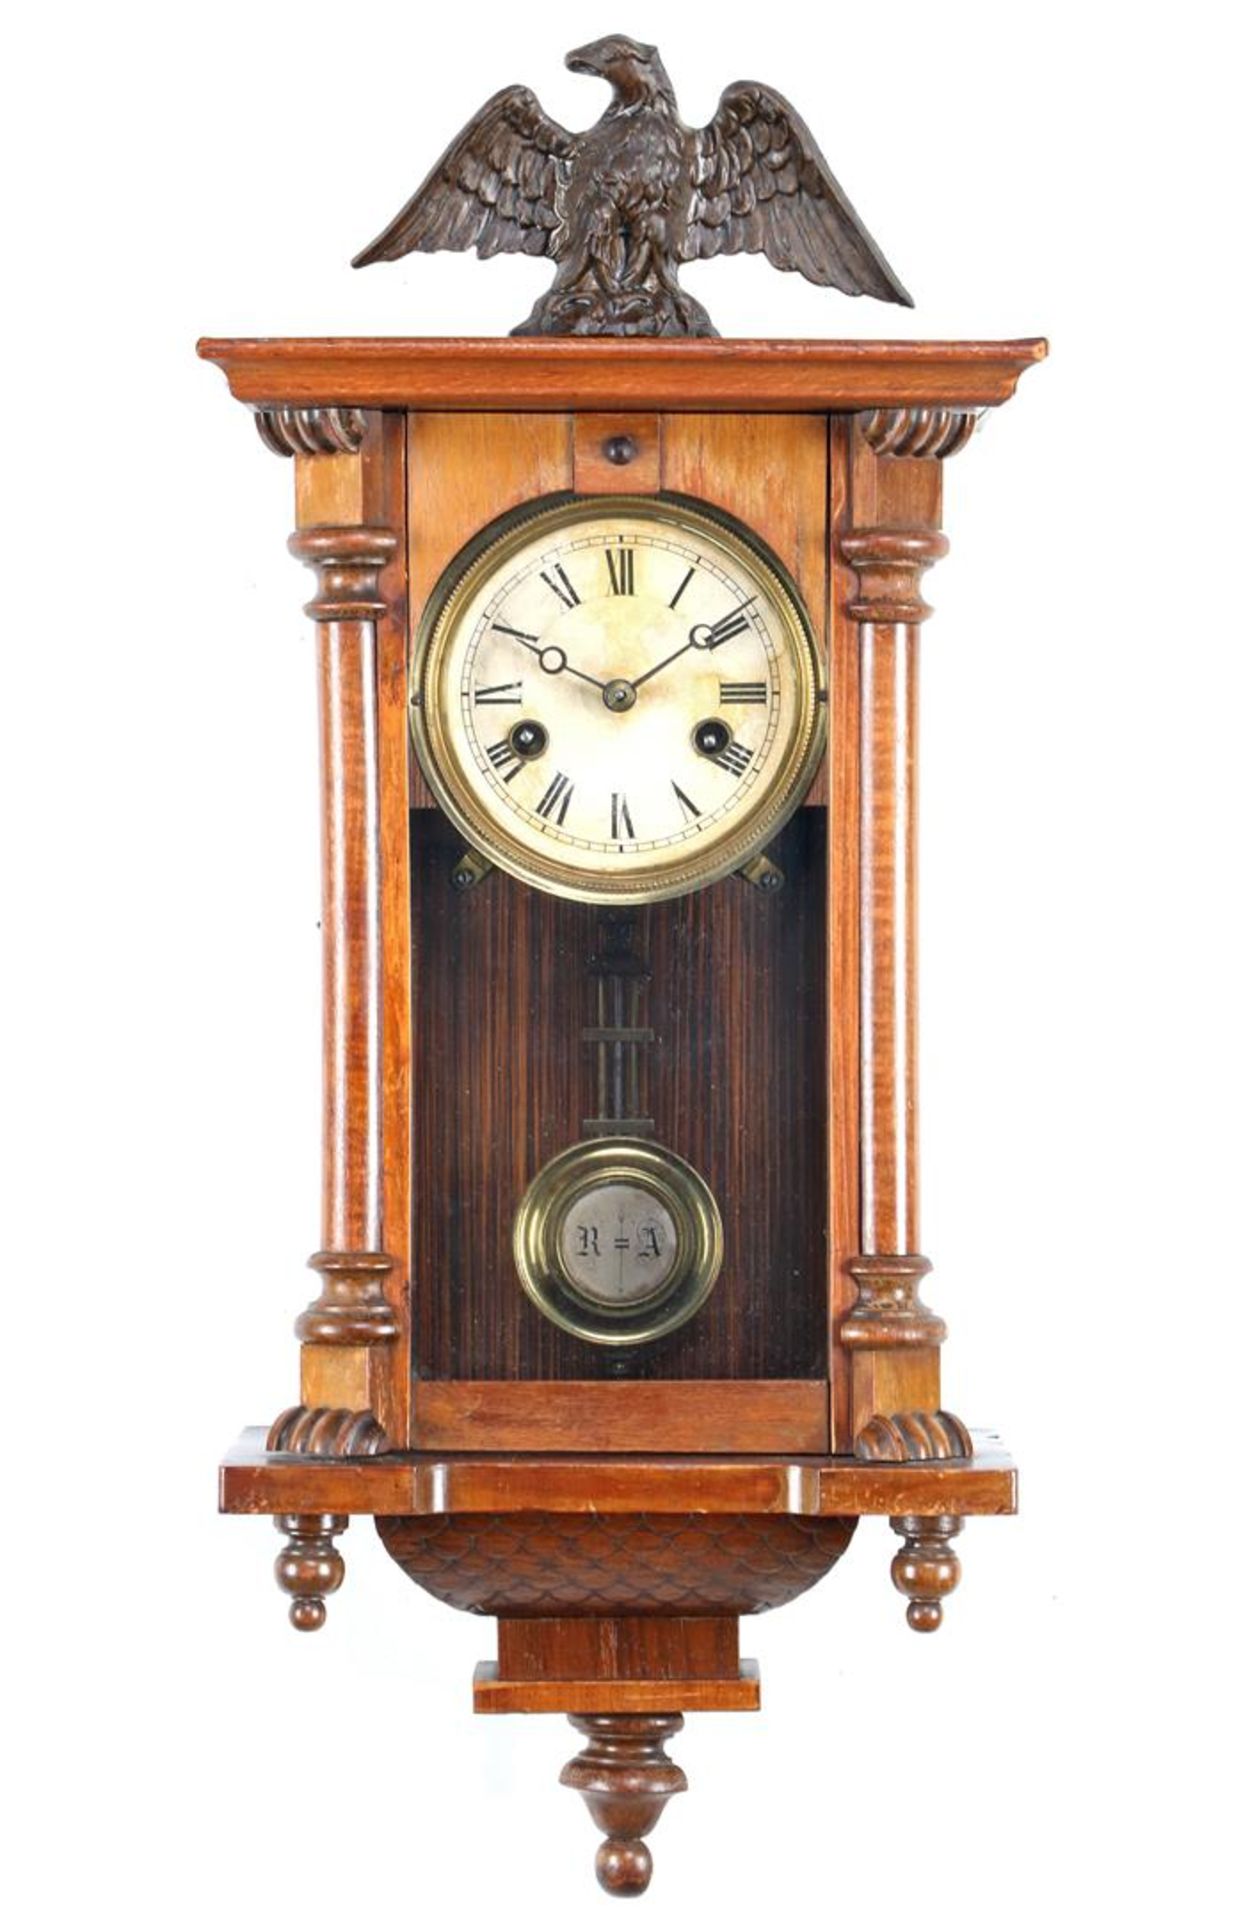 Regulator in walnut cabinet with eagle on top